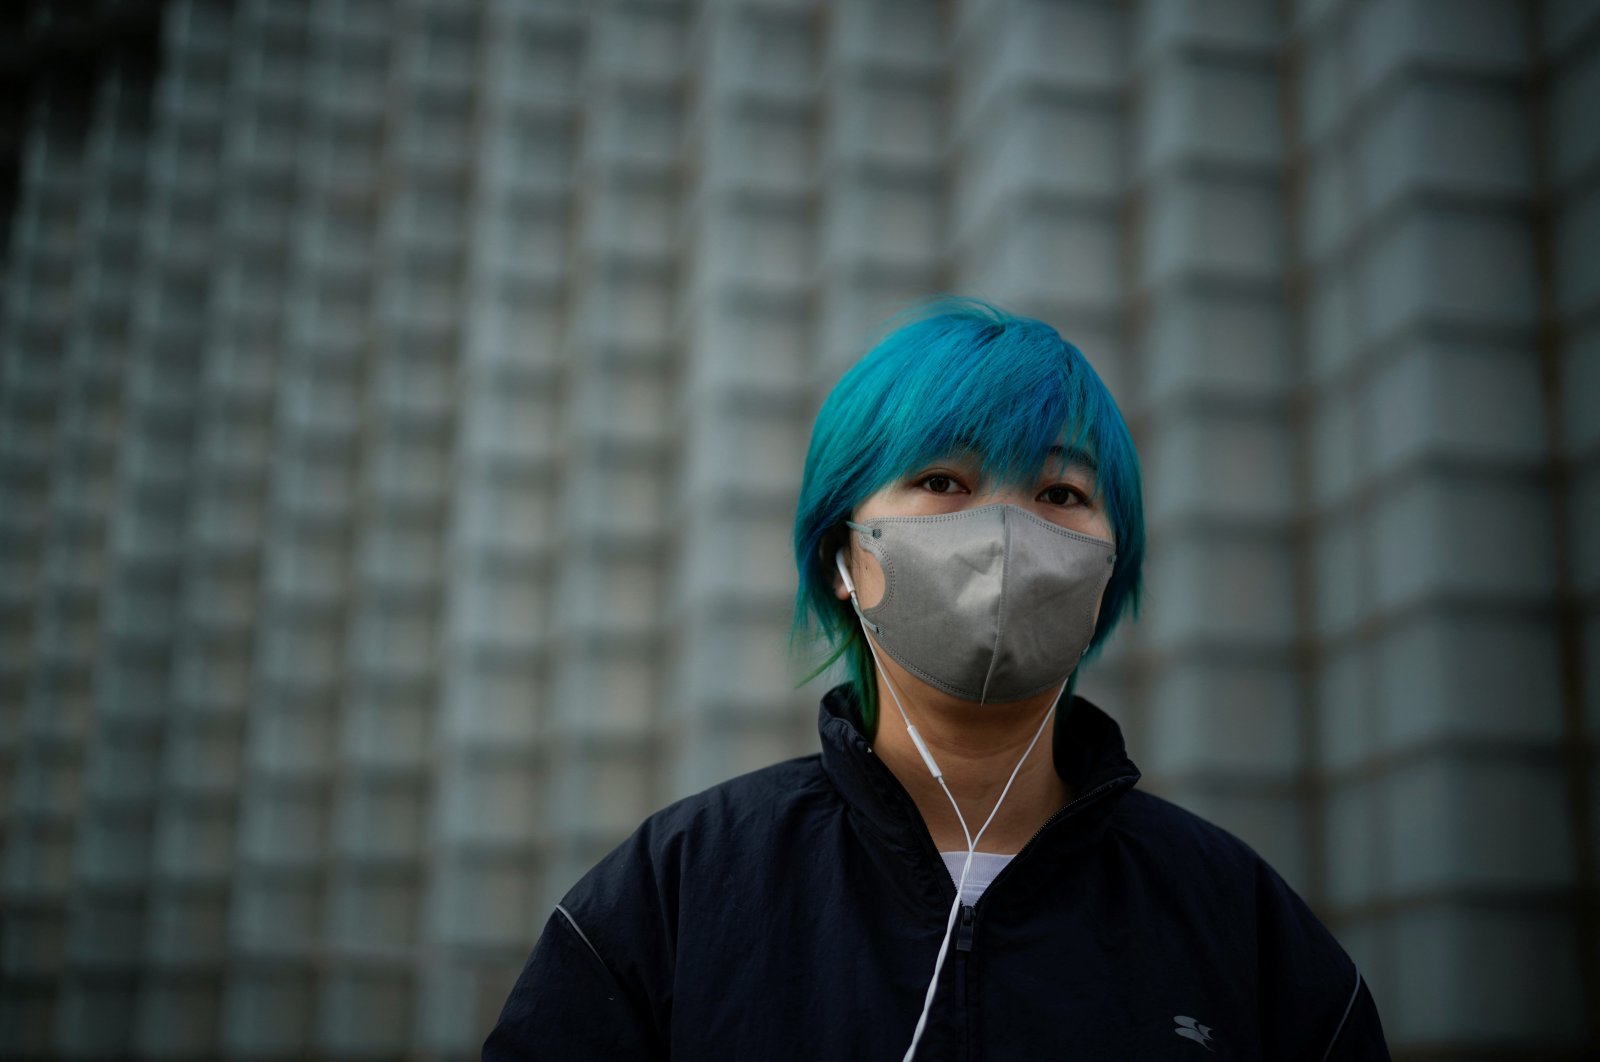 A woman wearing a face mask walks on the street, as coronavirus disease (COVID-19) outbreaks continue in Shanghai, China, Dec.12, 2022. (Reuters Photo)